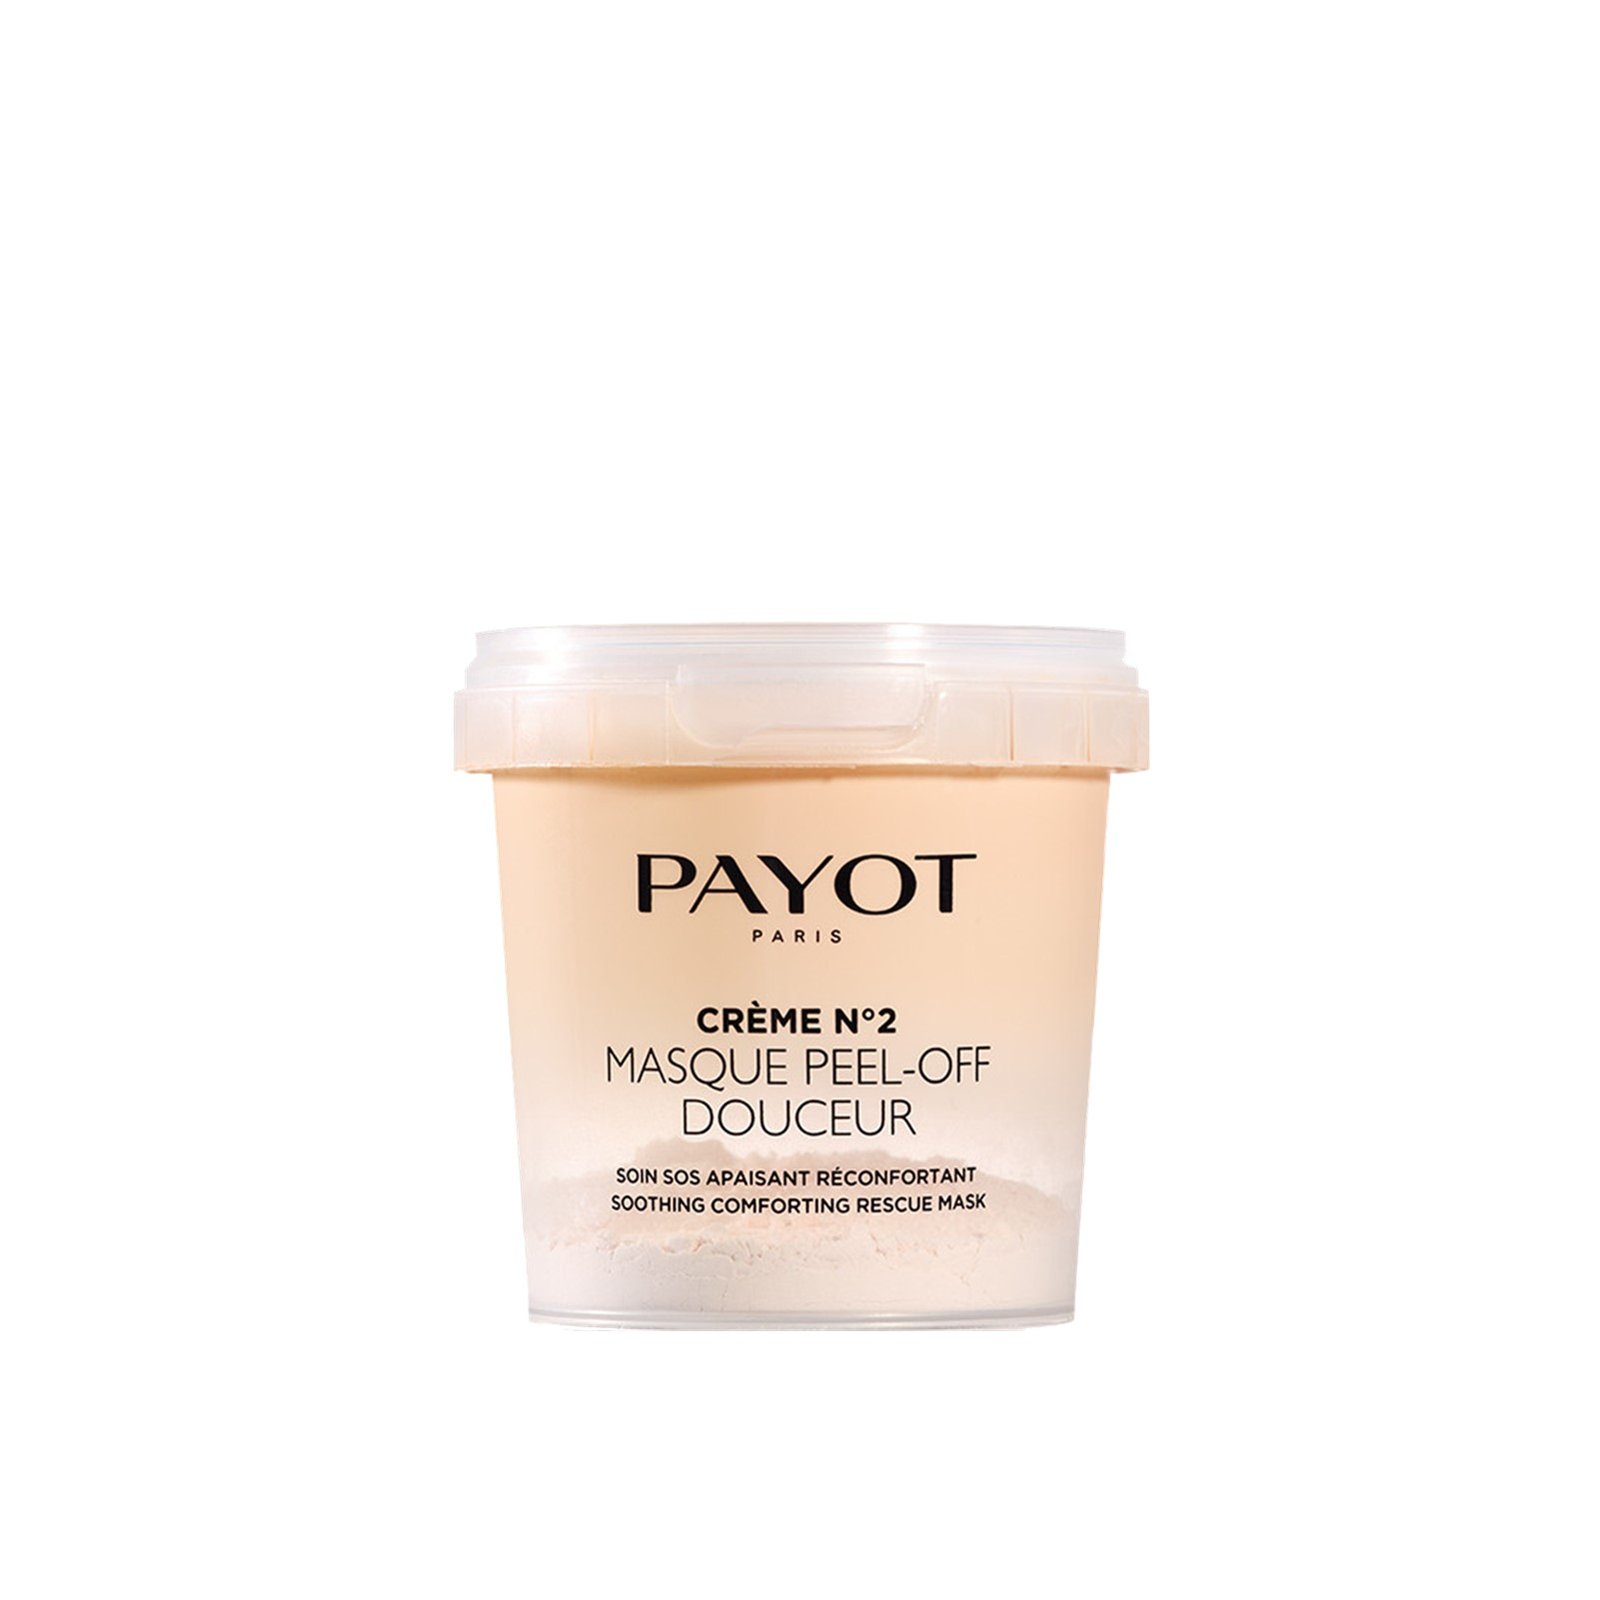 Payot Crème Nº2 Masque Peel-Off Douceur Soothing Comforting Rescue Mask 10g (0.35 oz)